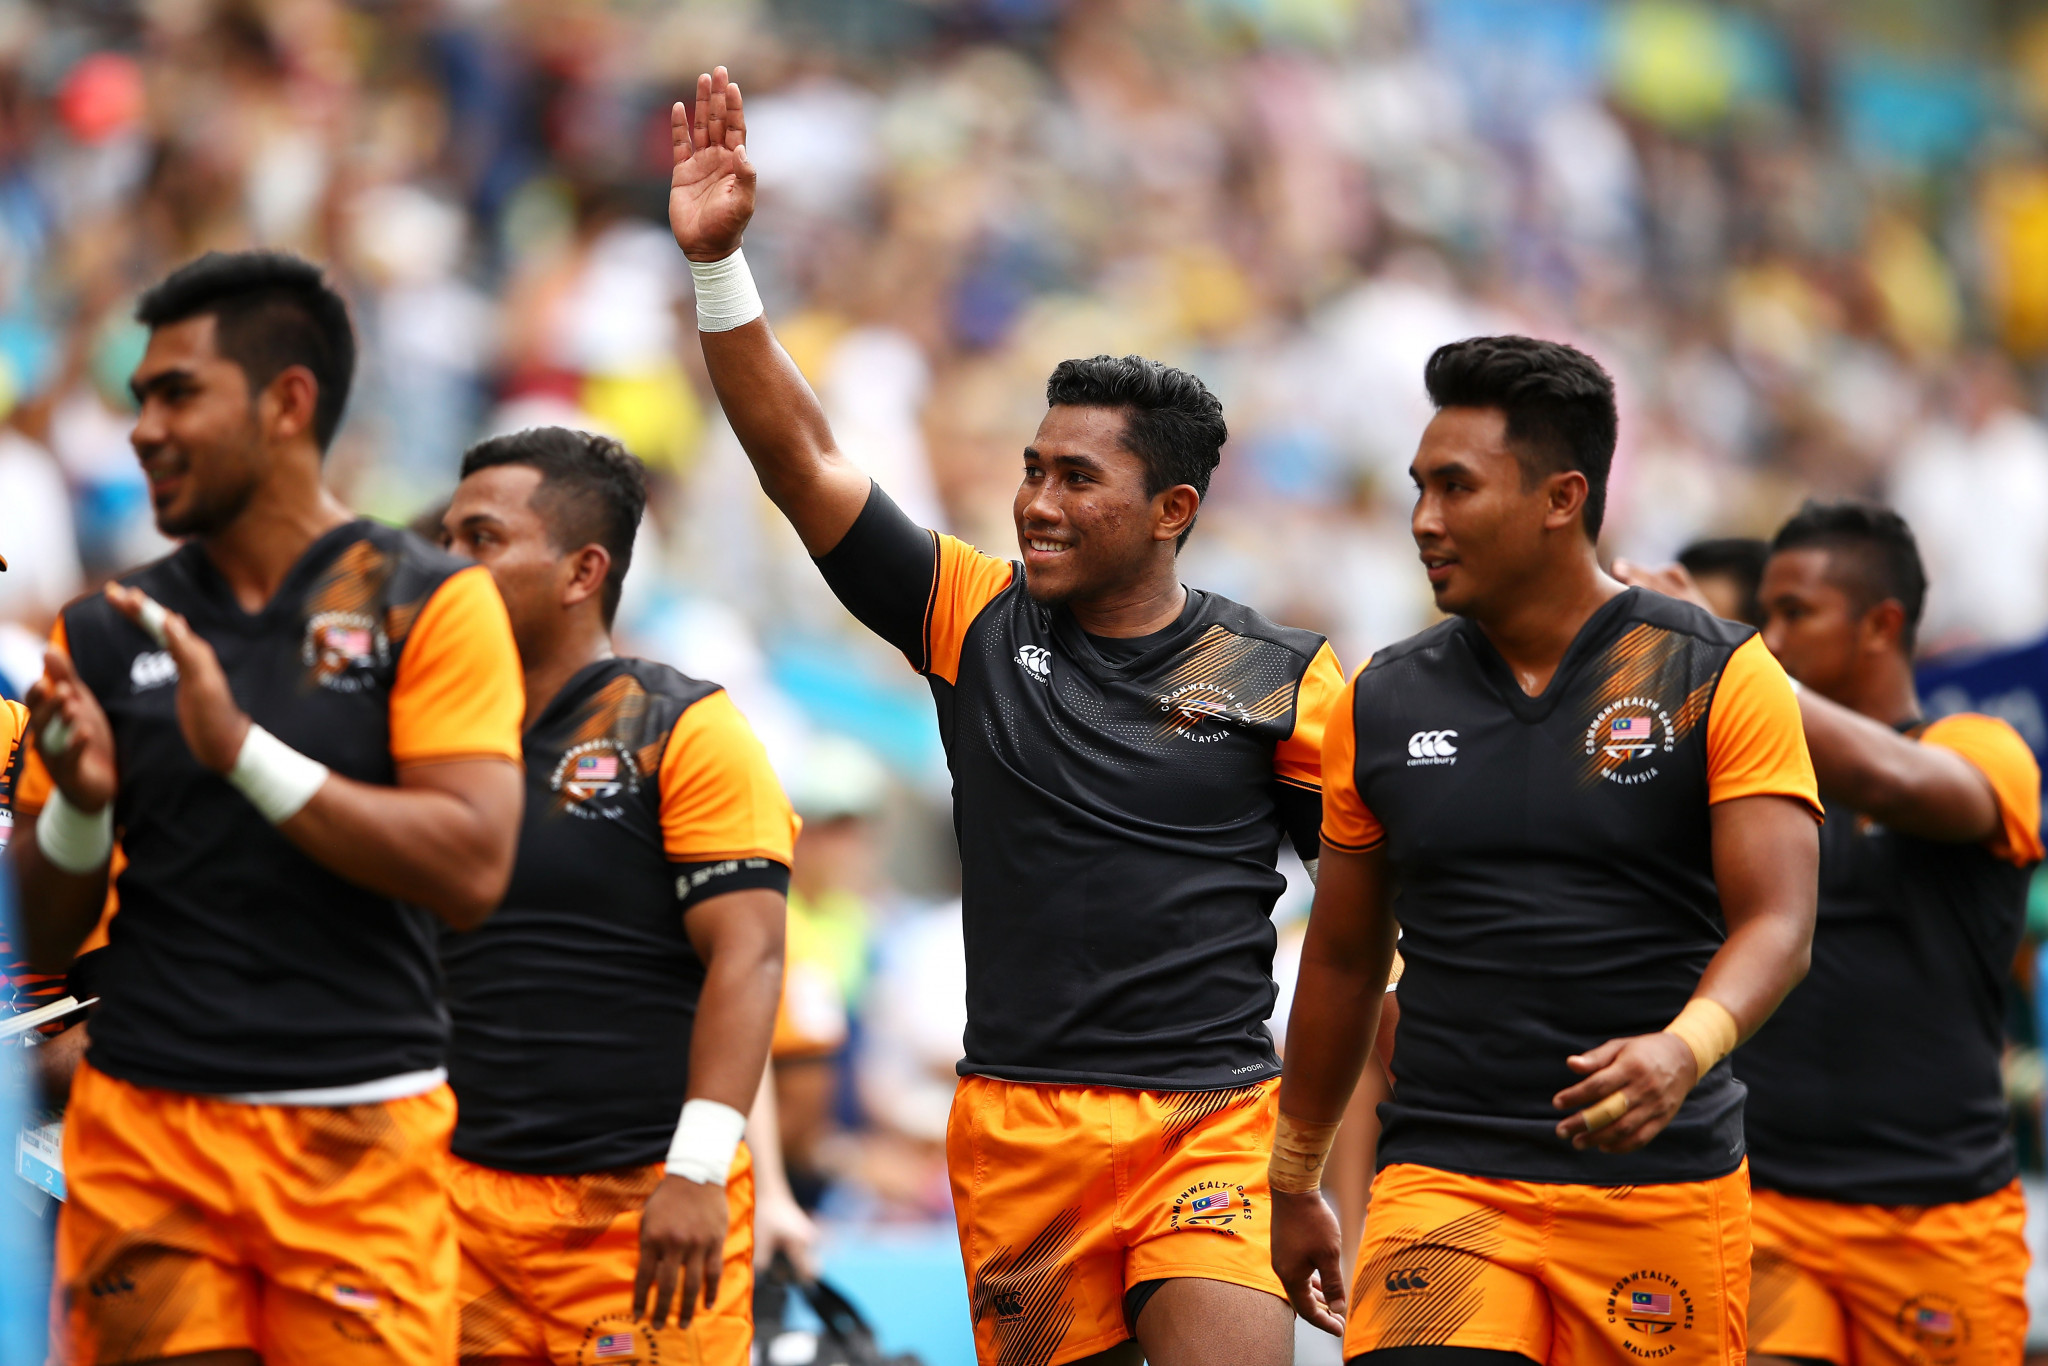 Malaysia's men's rugby sevens team were eliminated at the pool stage at Gold Coast 2018 ©Getty Images